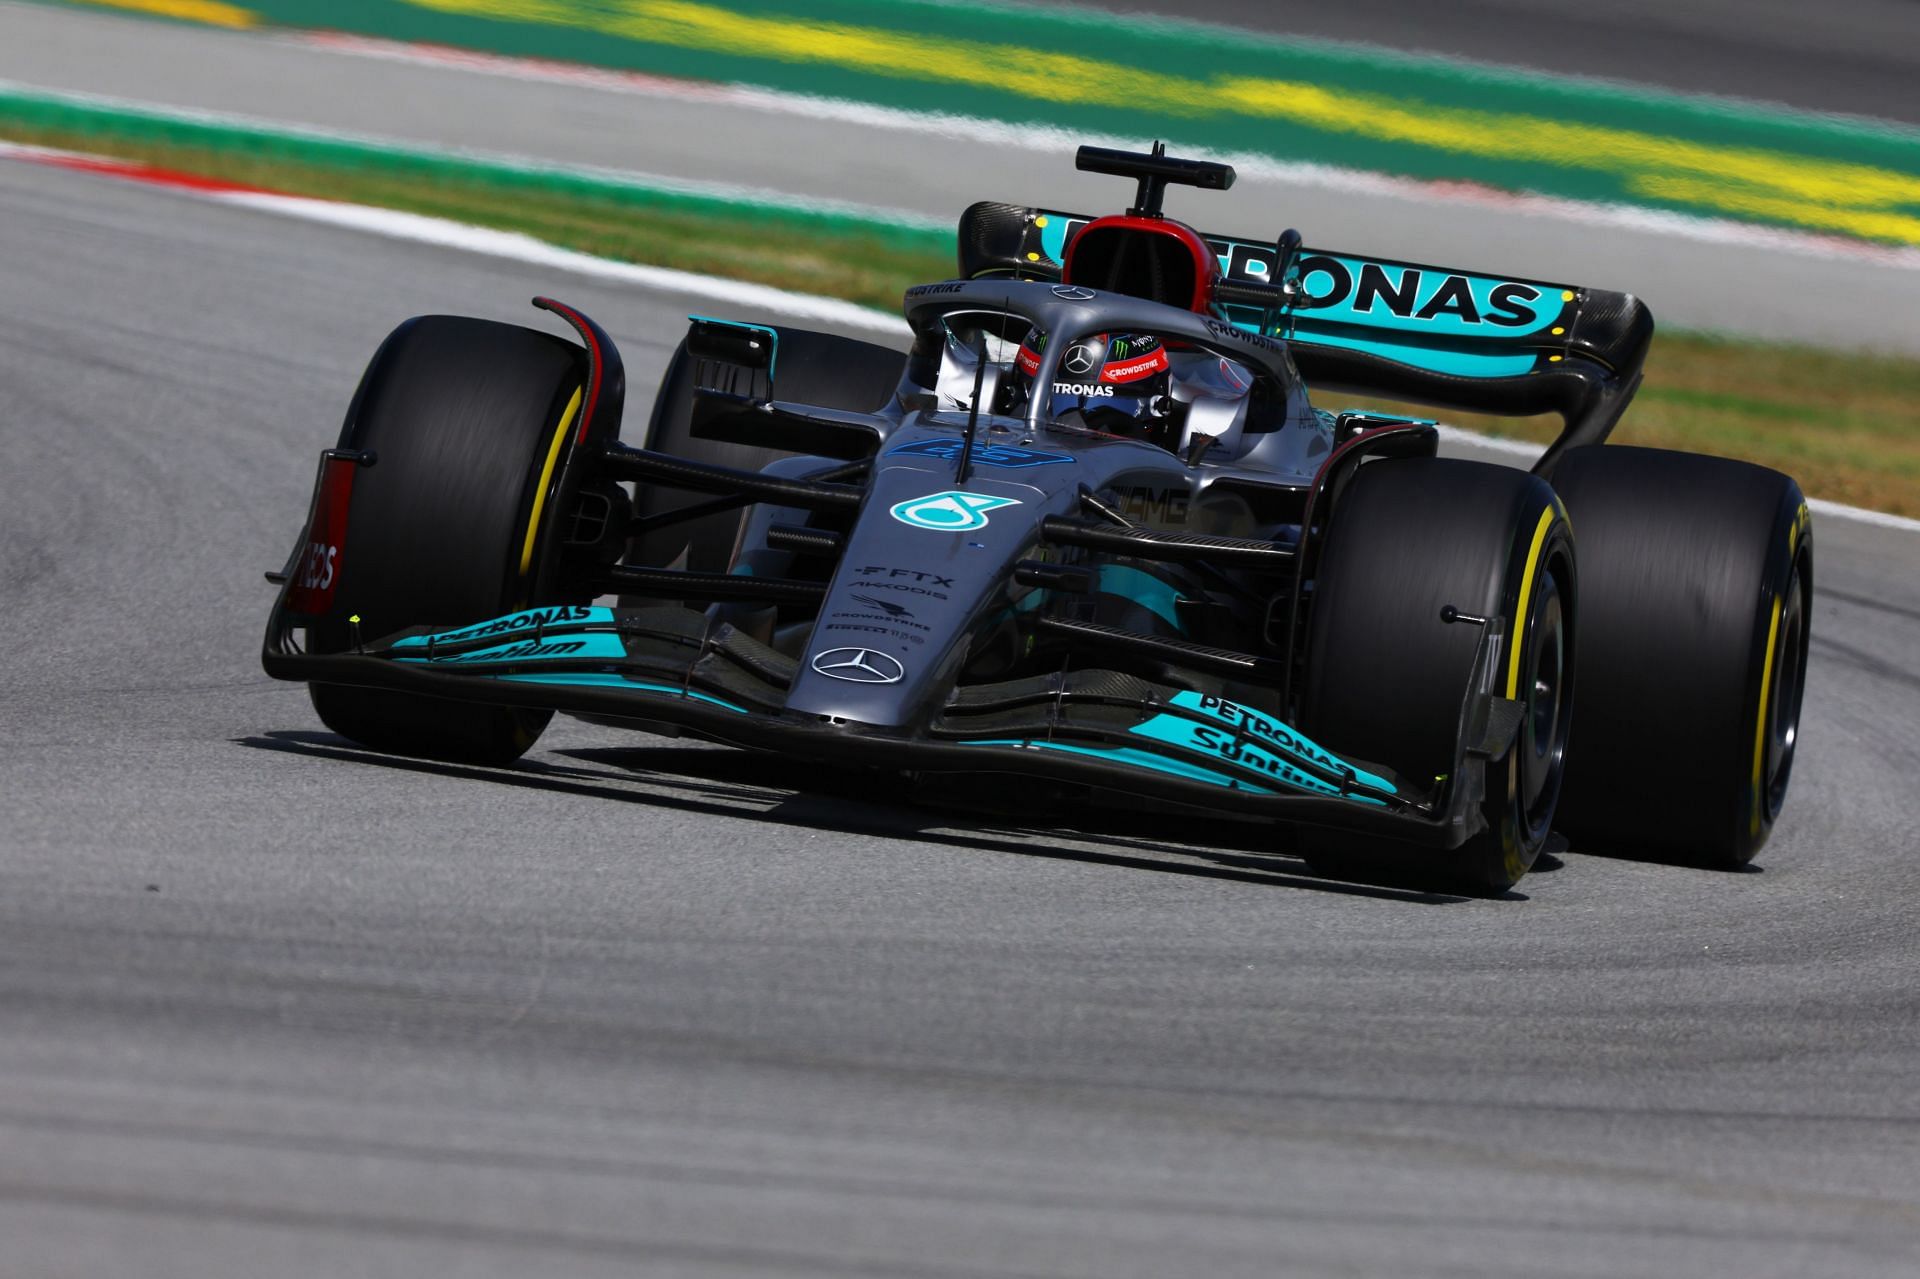 Will Mercedes be able to hold on to its strong form?